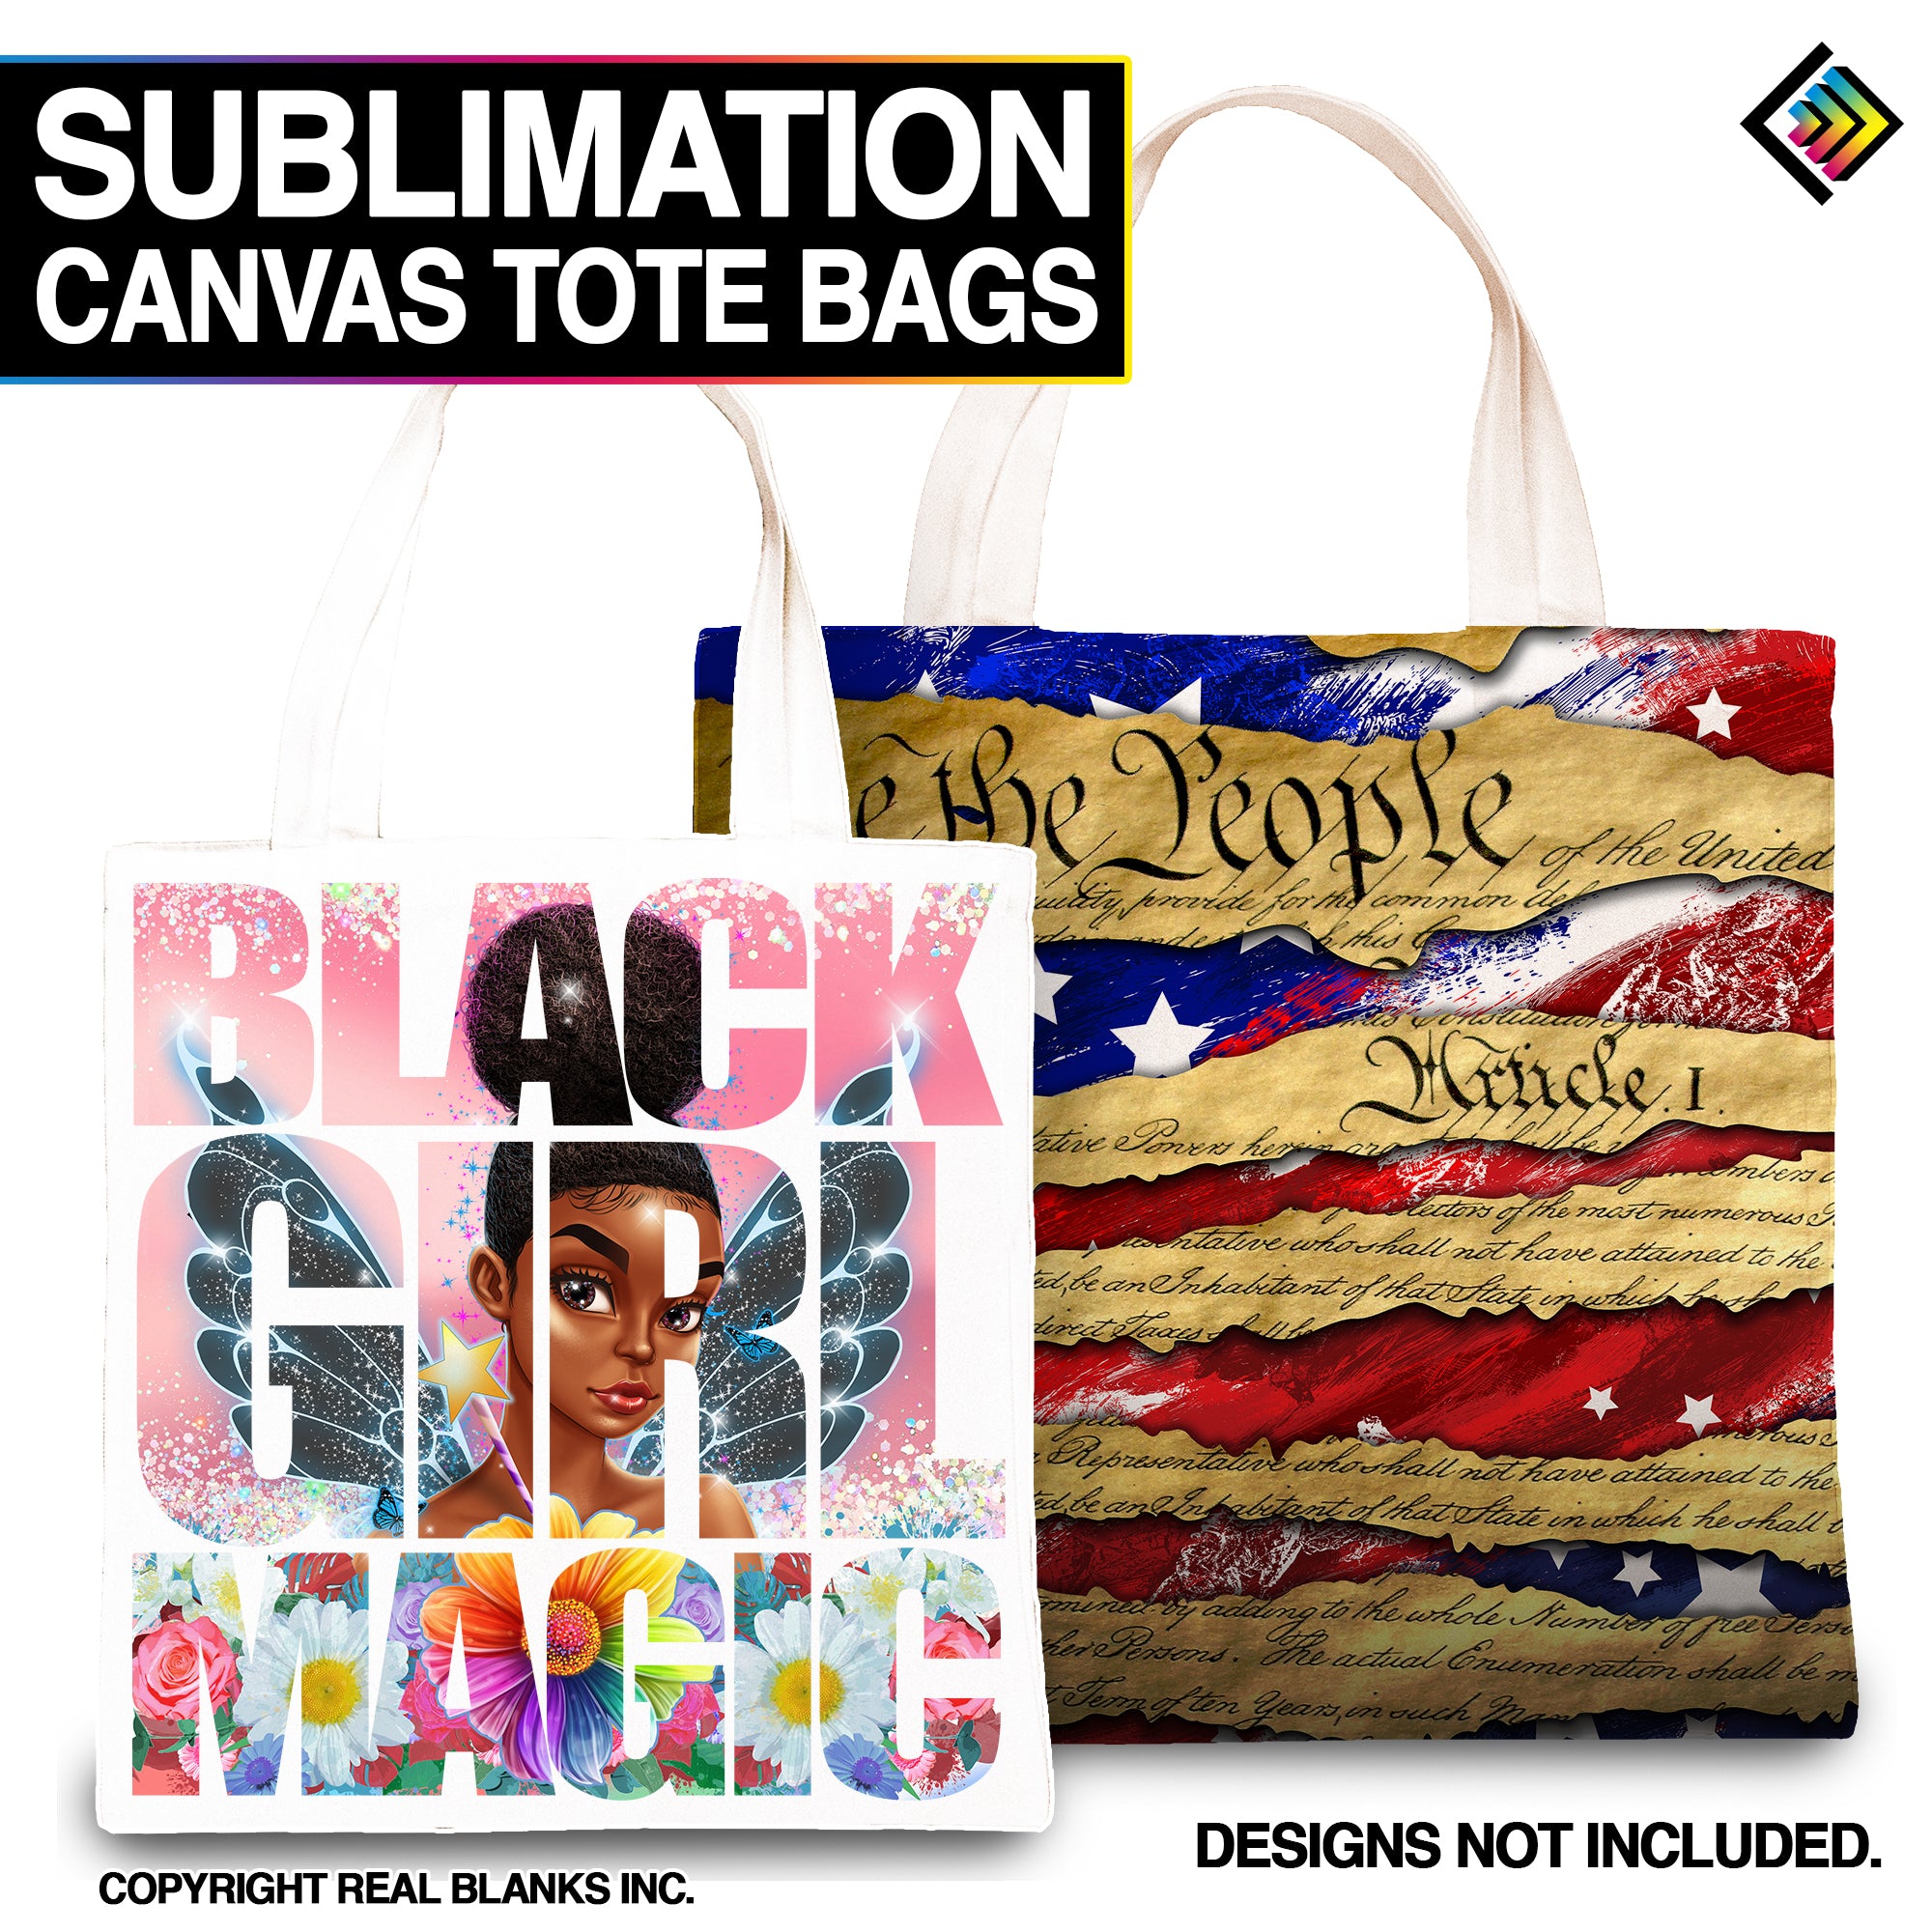  Polyester Canvas For Sublimation